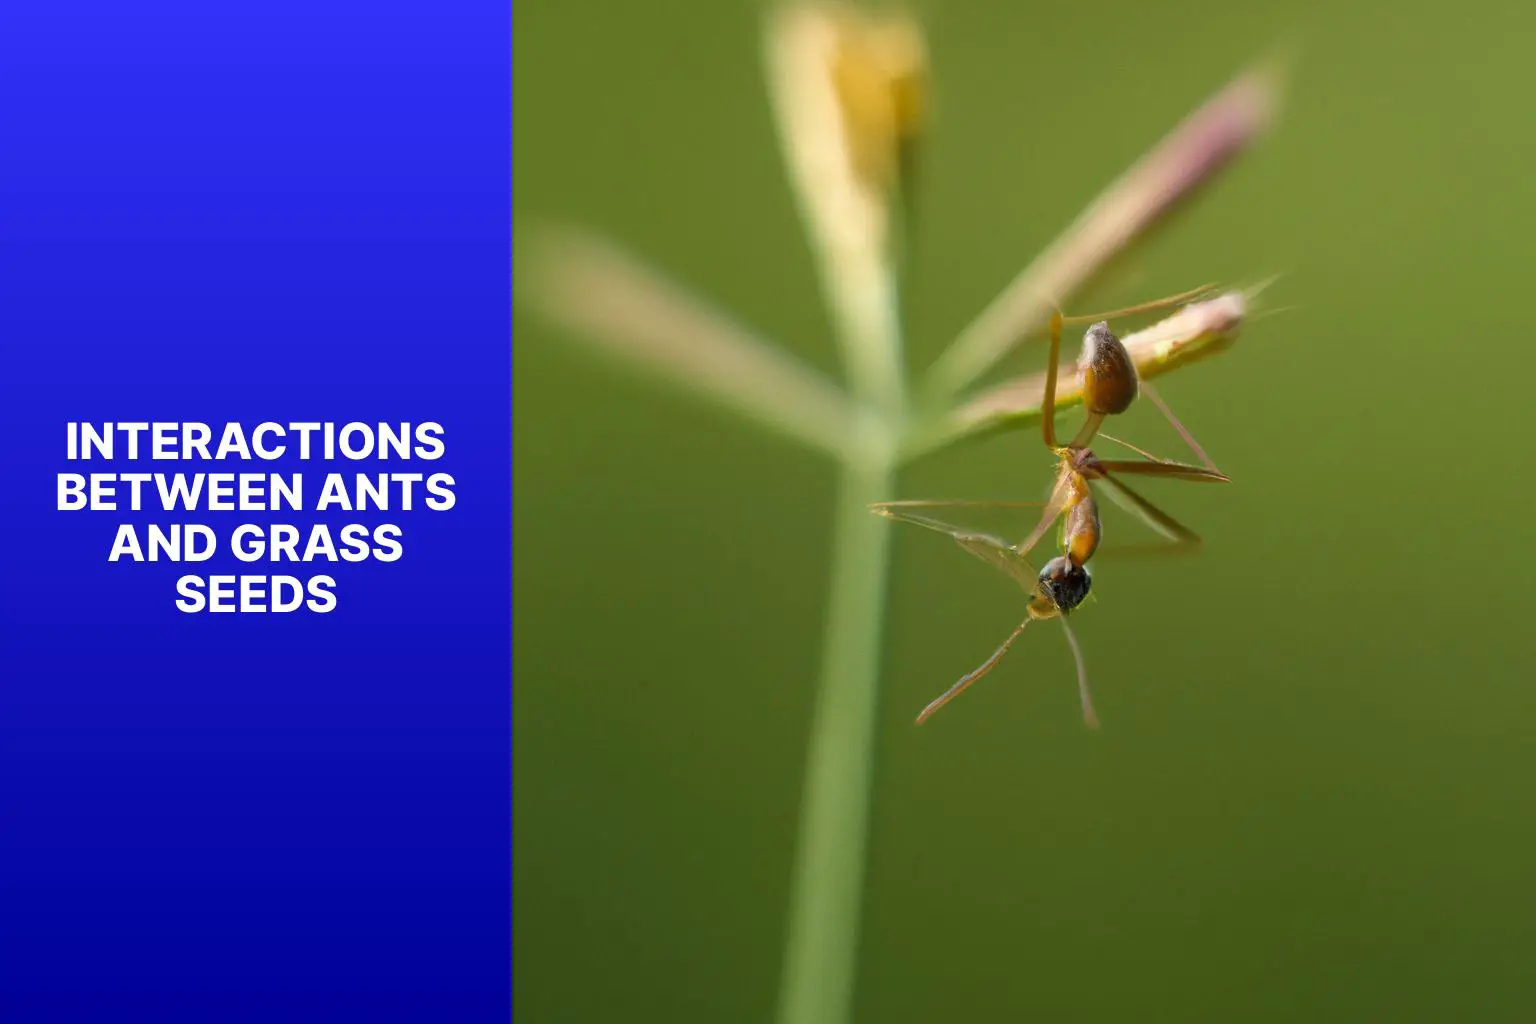 Interactions Between Ants and Grass Seeds - Do Ants Eat Grass Seeds? 